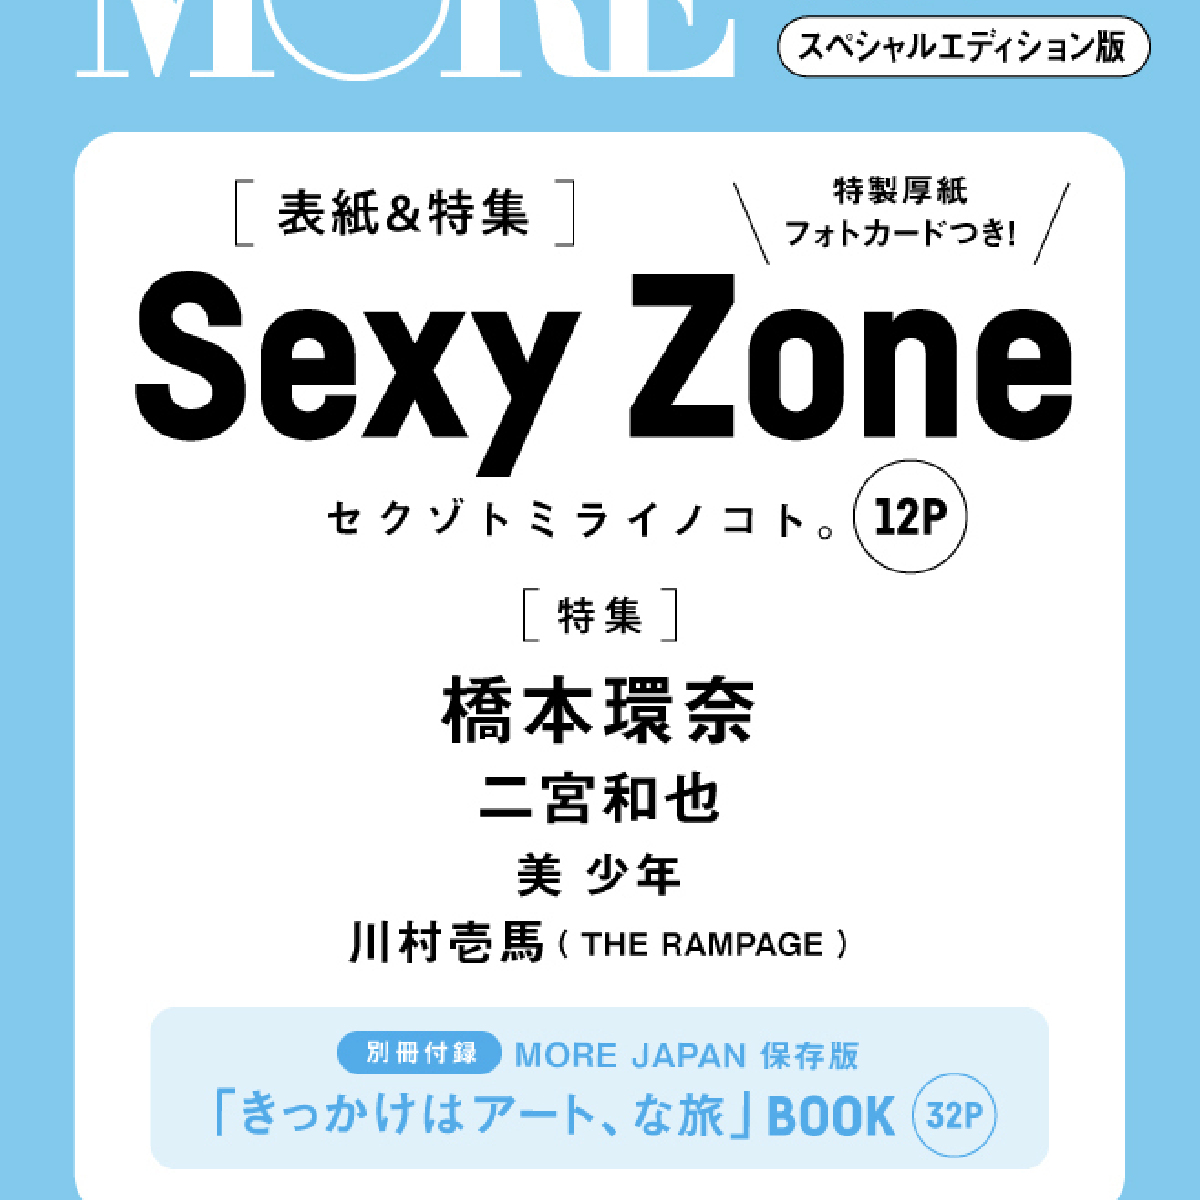 【For Sexy Zone fans！】We now offer shipping to customers in overseas! ＜MORE November issue, Sexy Zone appears on  special edition cover!＞　